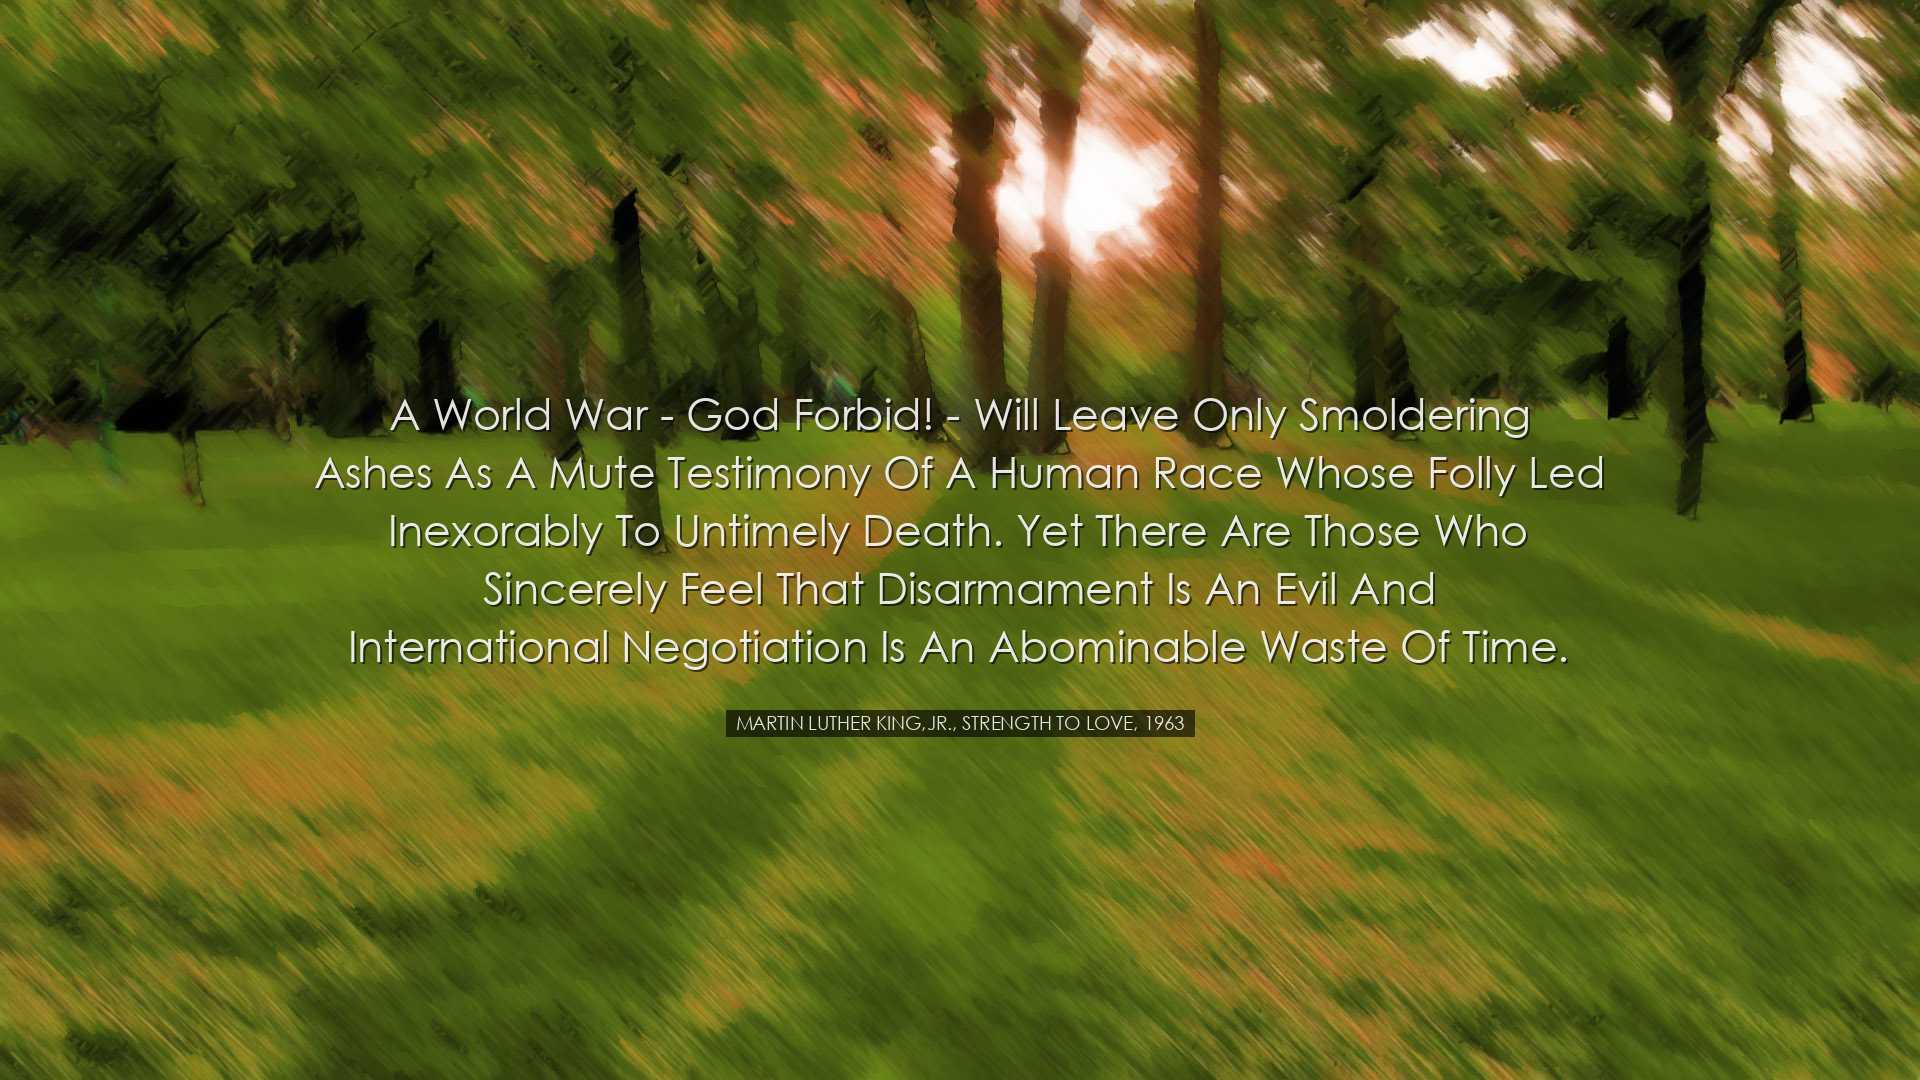 A world war - God forbid! - will leave only smoldering ashes as a